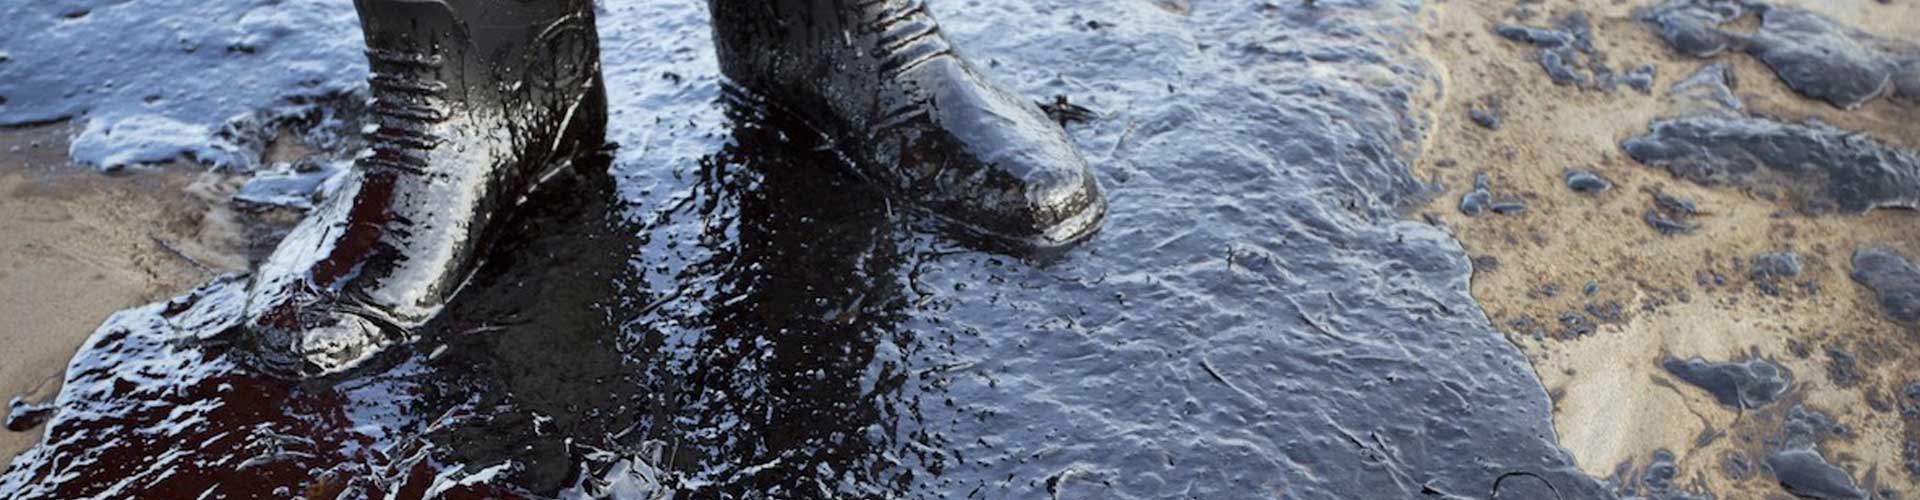 Boots standing on top of an oil slick